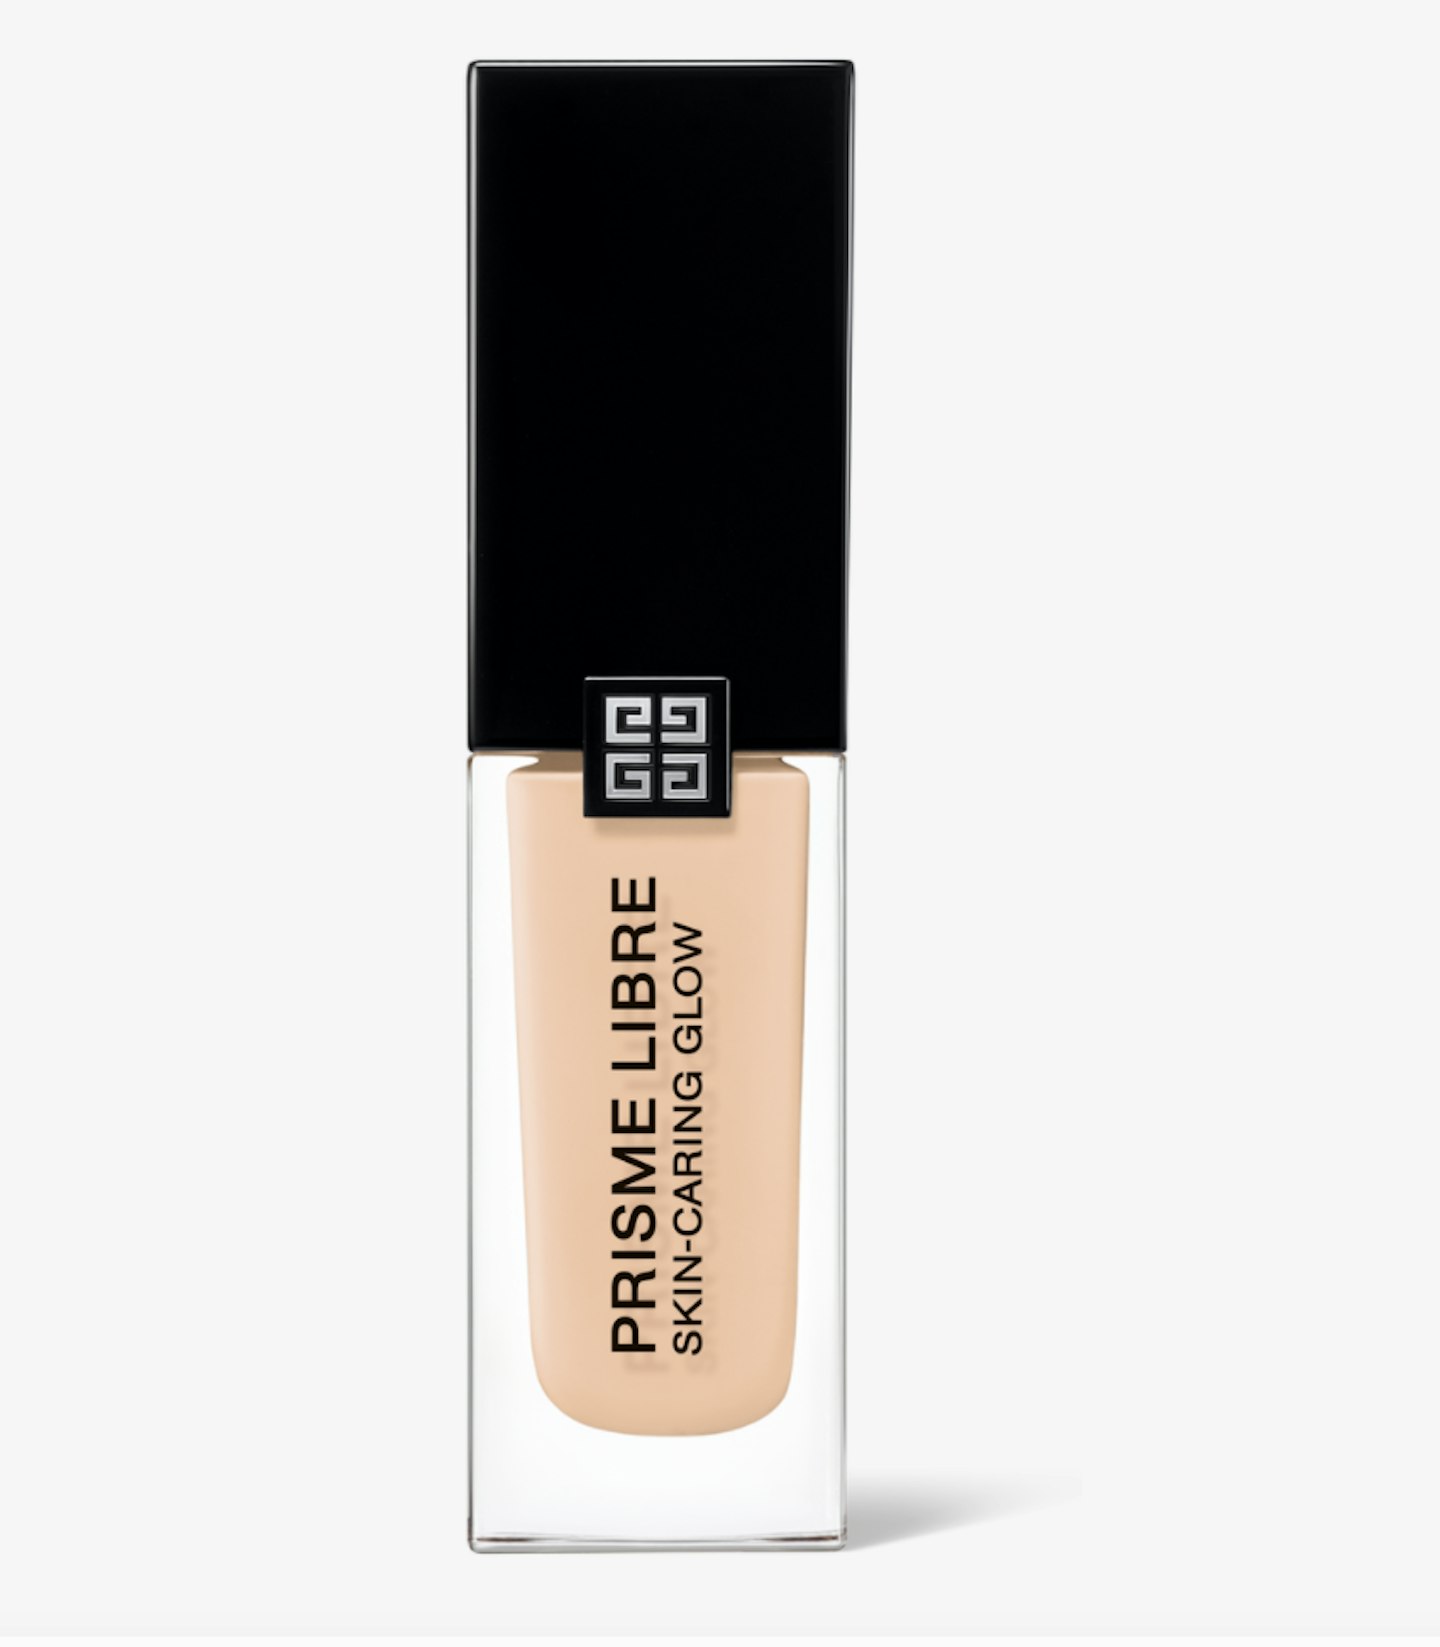 Best foundations for pale skin Black Friday